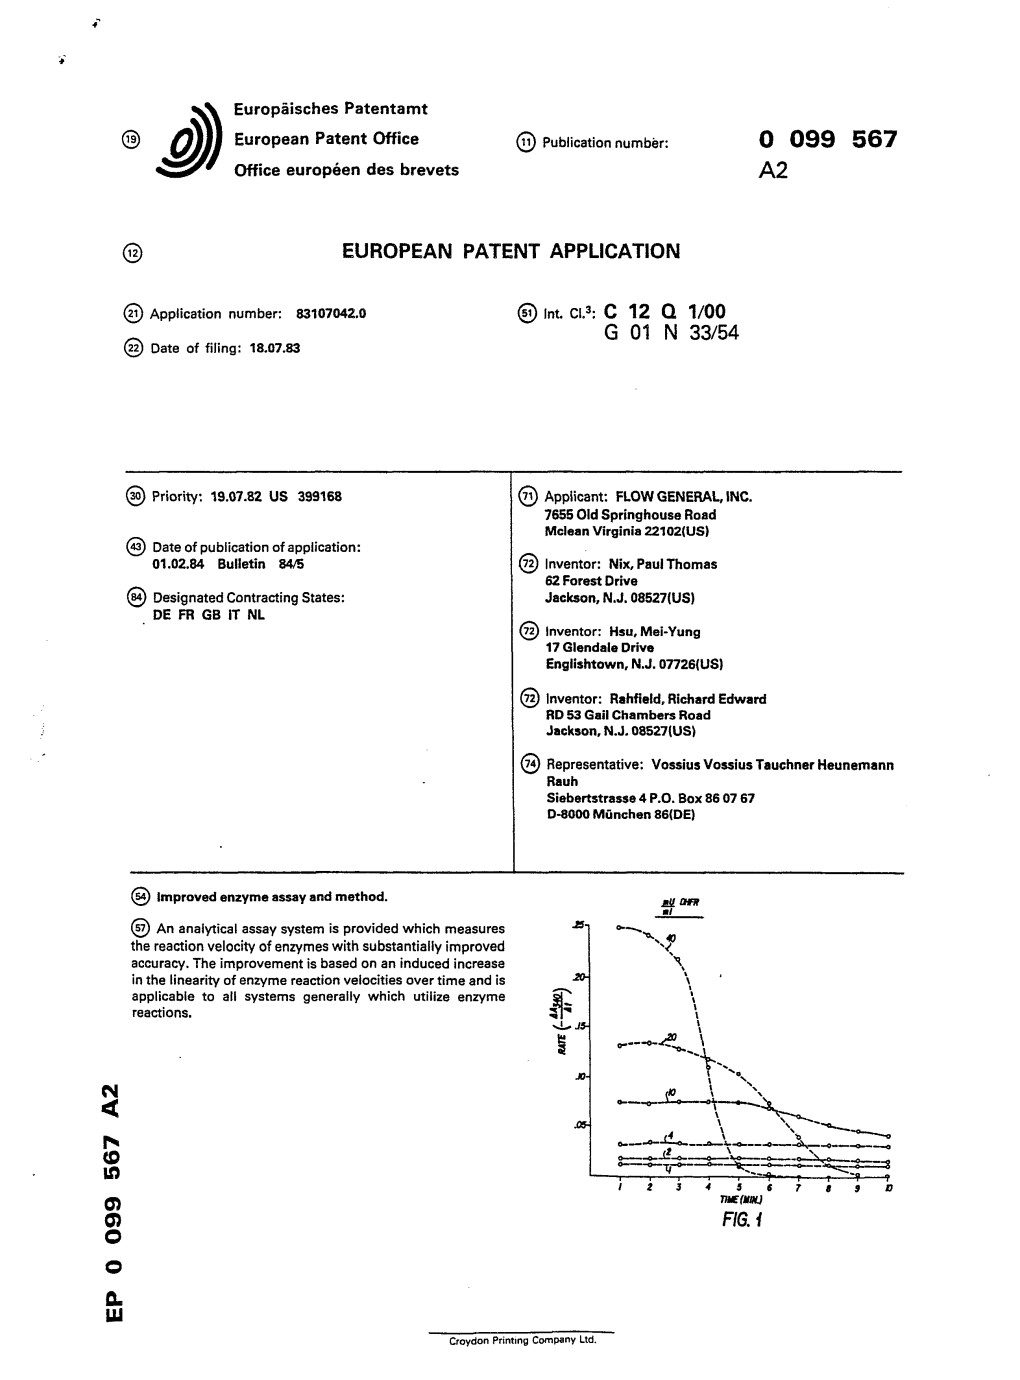 Improved Enzyme Assay and Method